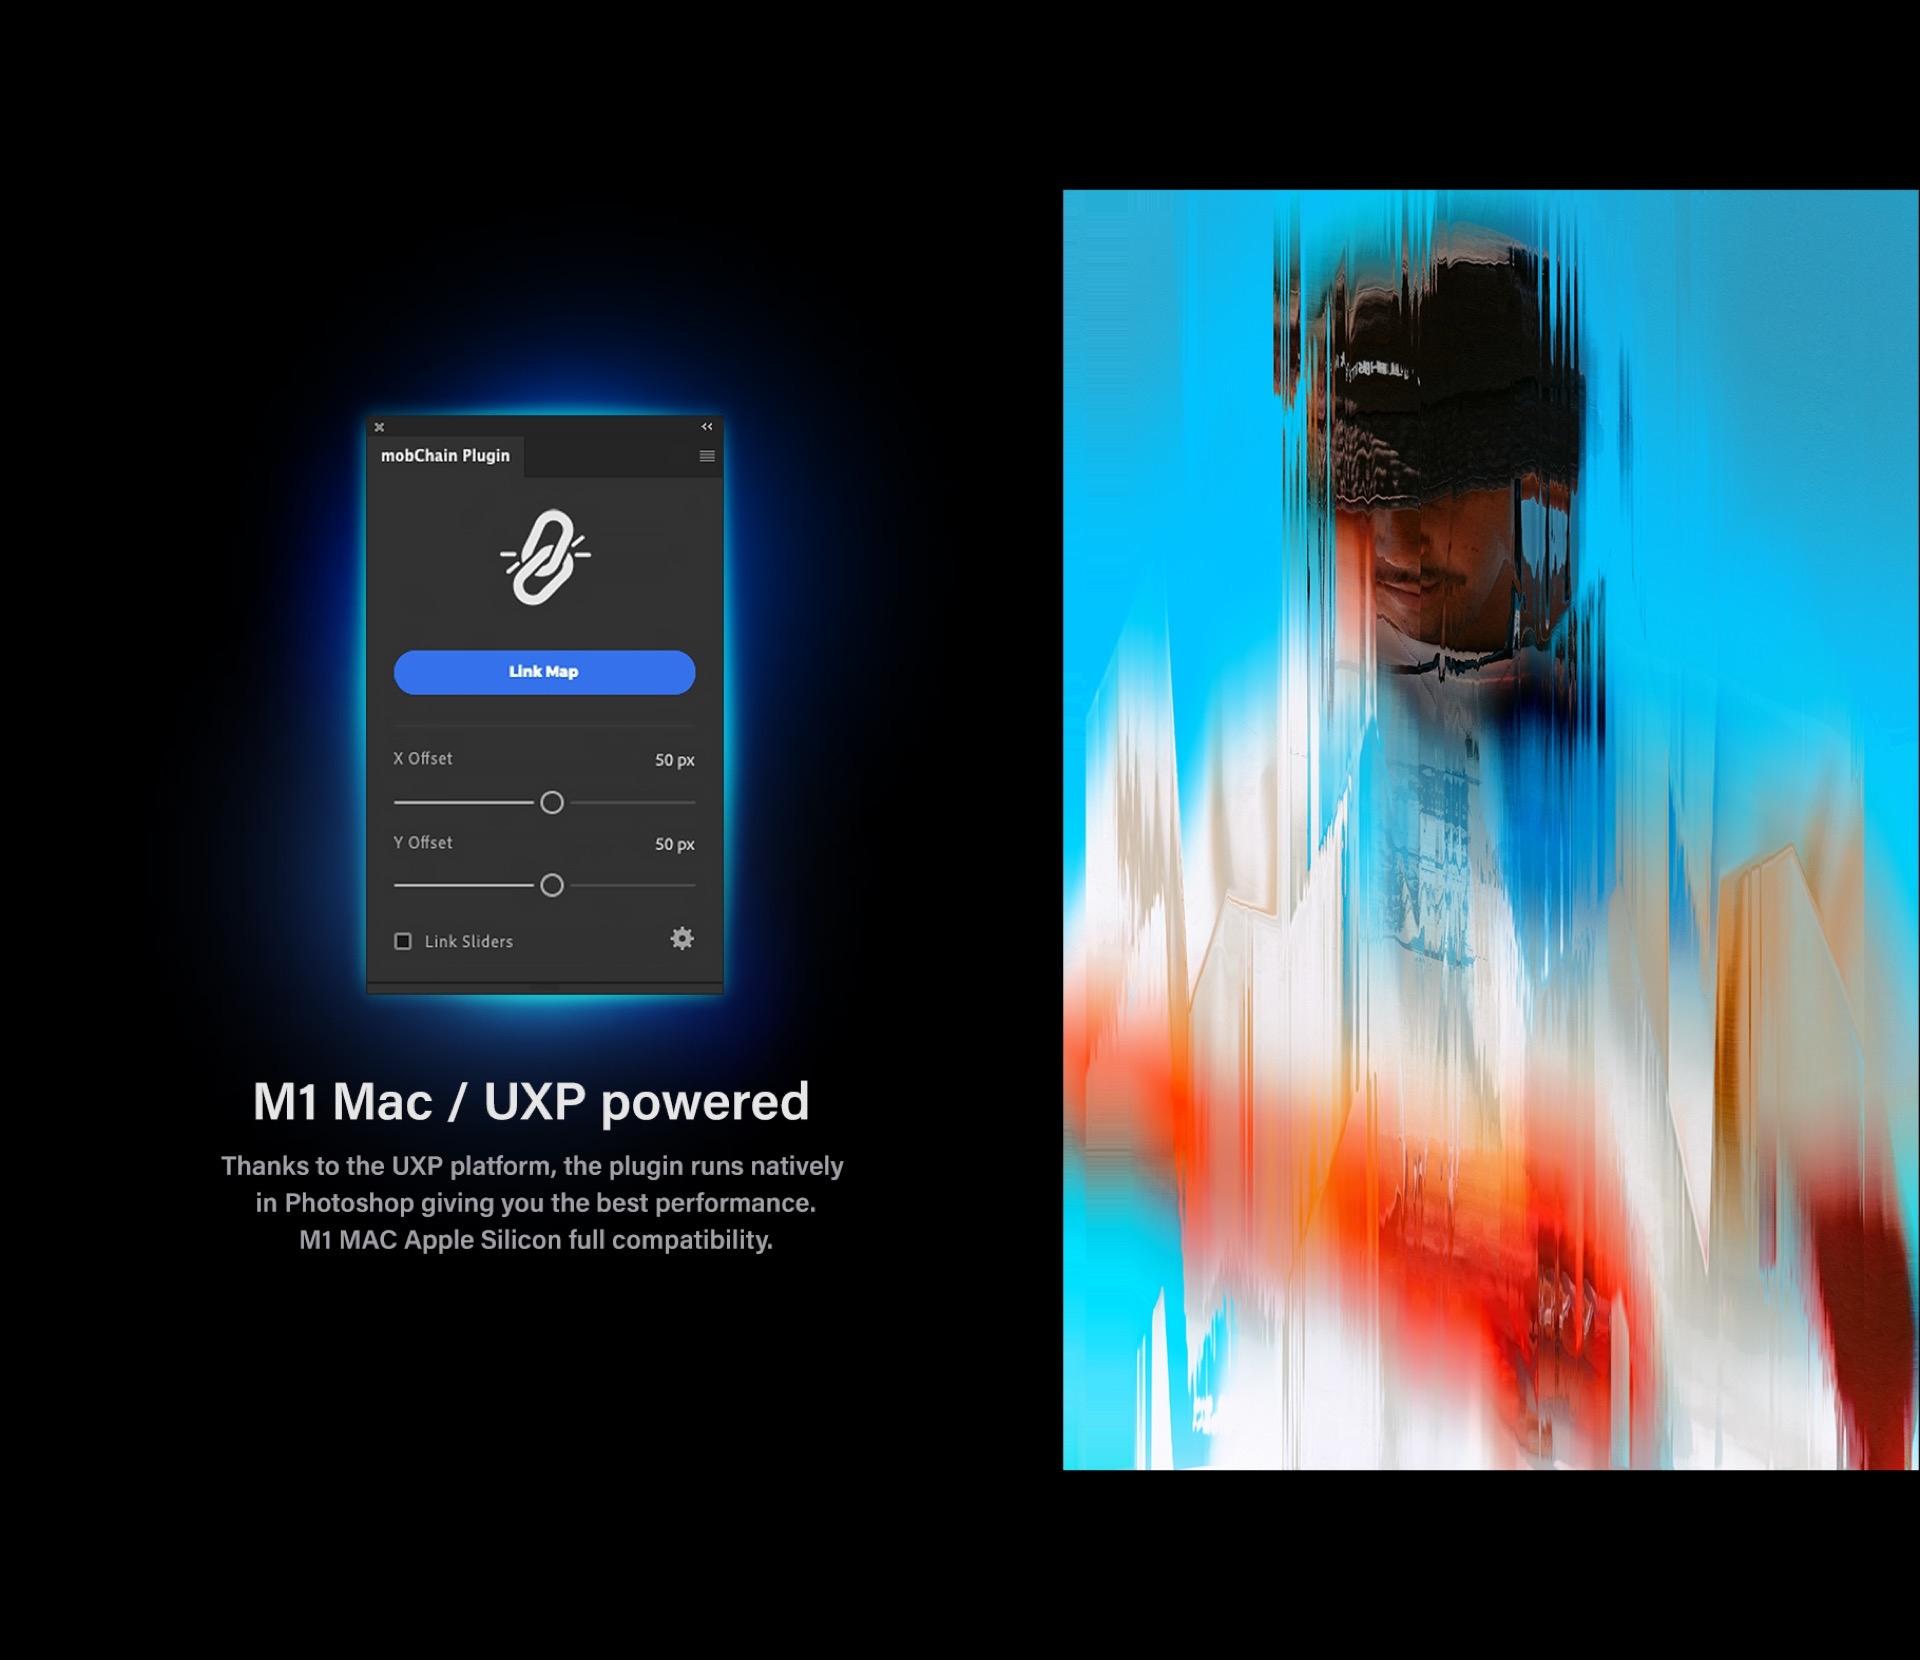 M1 Mac / UXP powered. Thanks to the UXP platform, the plugin runs natively in Photoshop giving you the best performance. M1 MAC Apple Silicon full compatibility